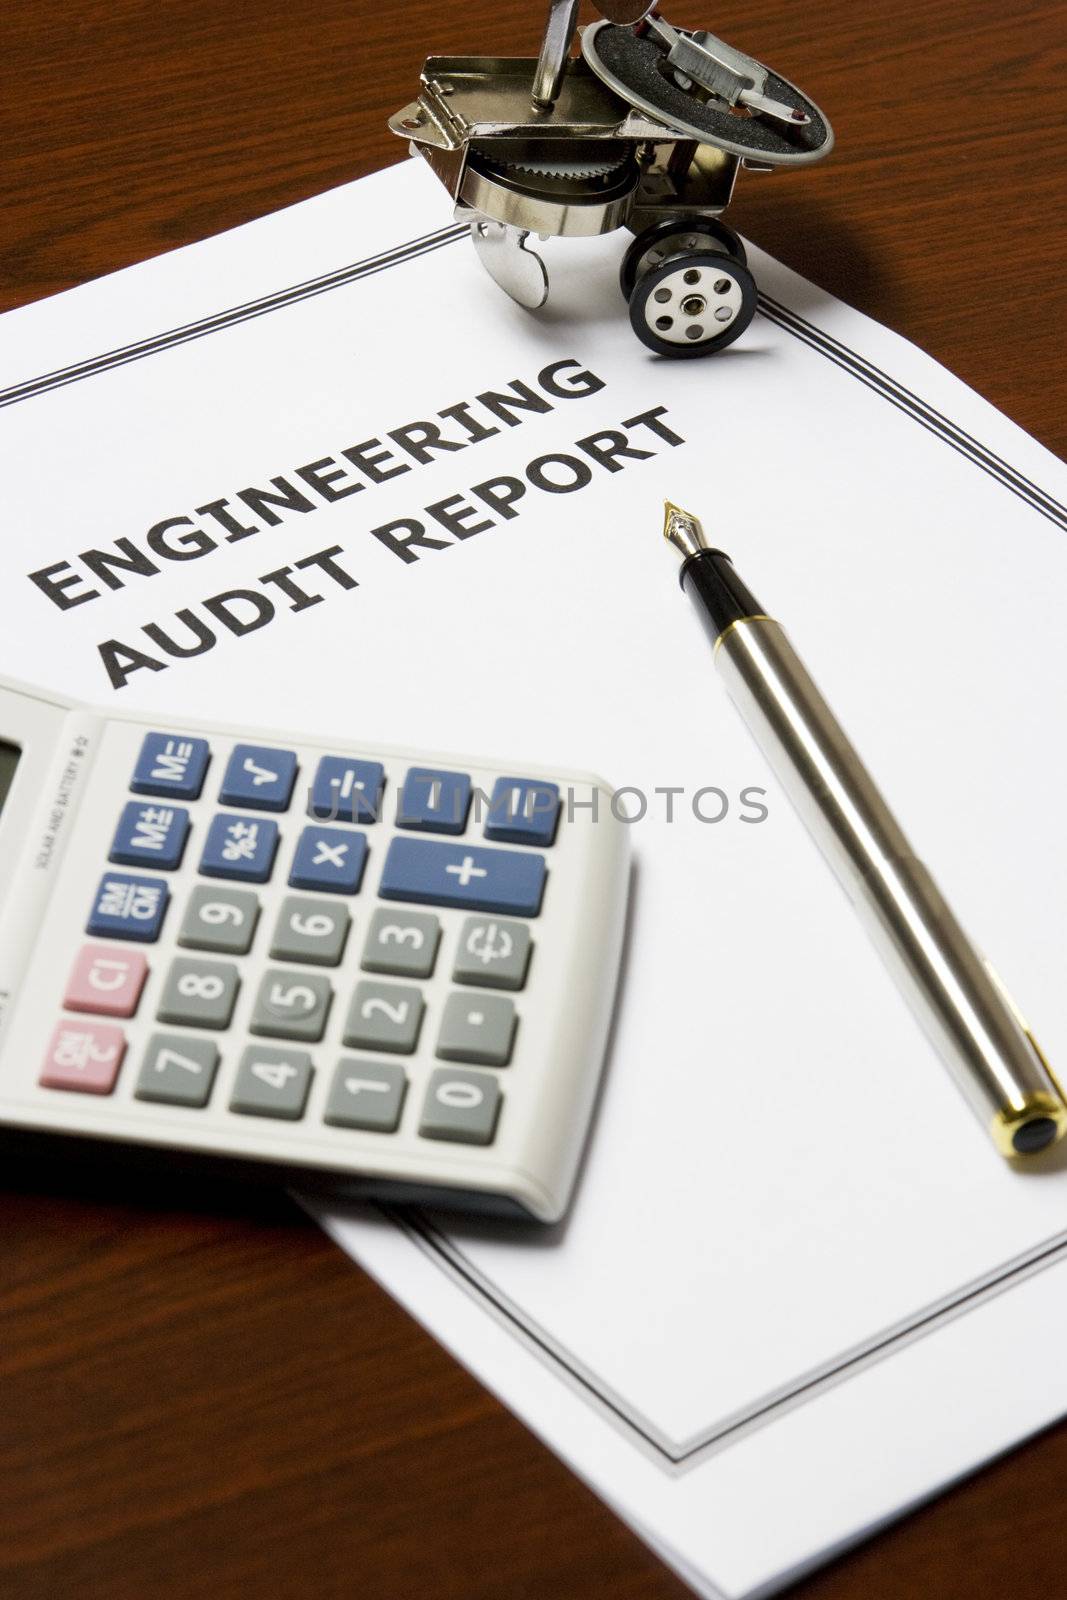 Image of an engineering audit report on an office table.